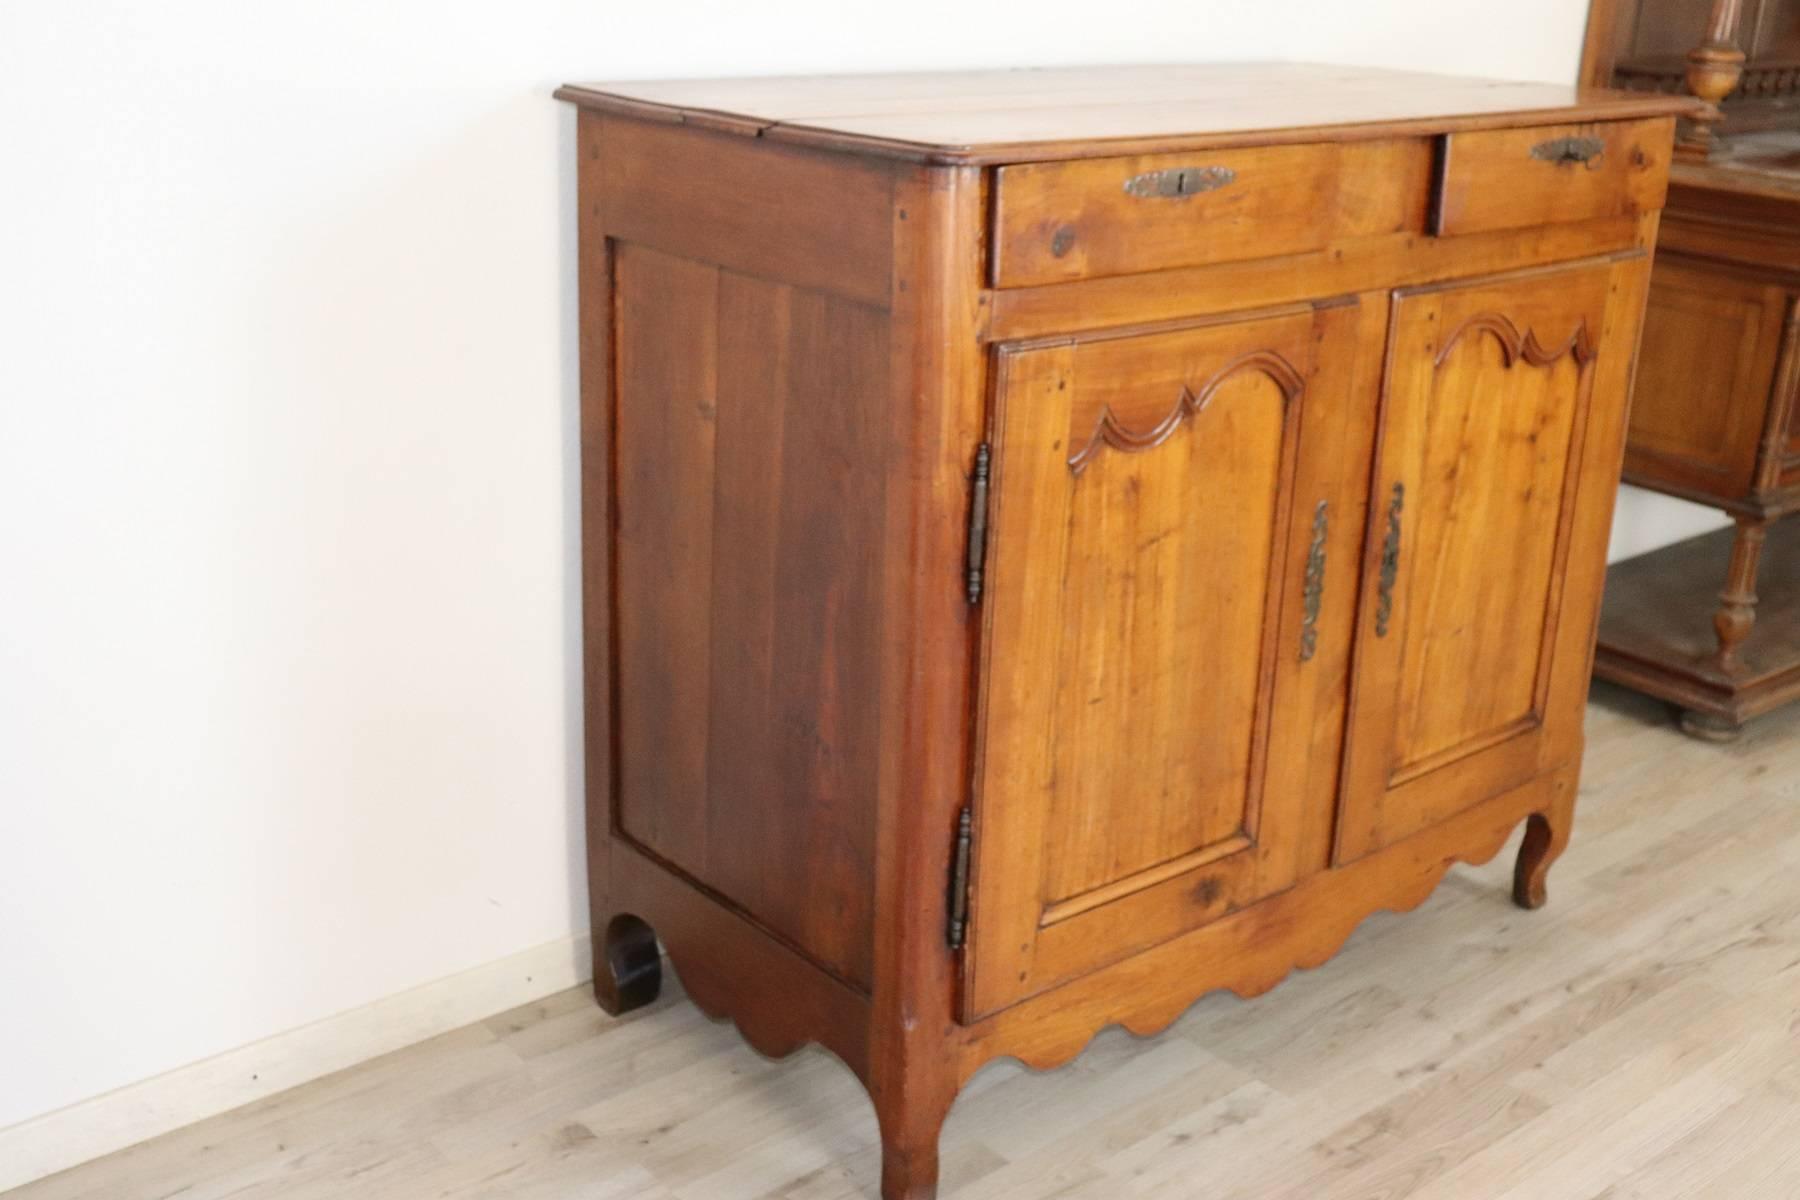 Beautiful French Provencal cherry wood sideboard. The doors have a motif blurred. Even the wavy and slender feet recall the Louis XV style.
Ideal sideboard in any environment, beautiful warm and clear color of cherrywood. Very spacious inside.